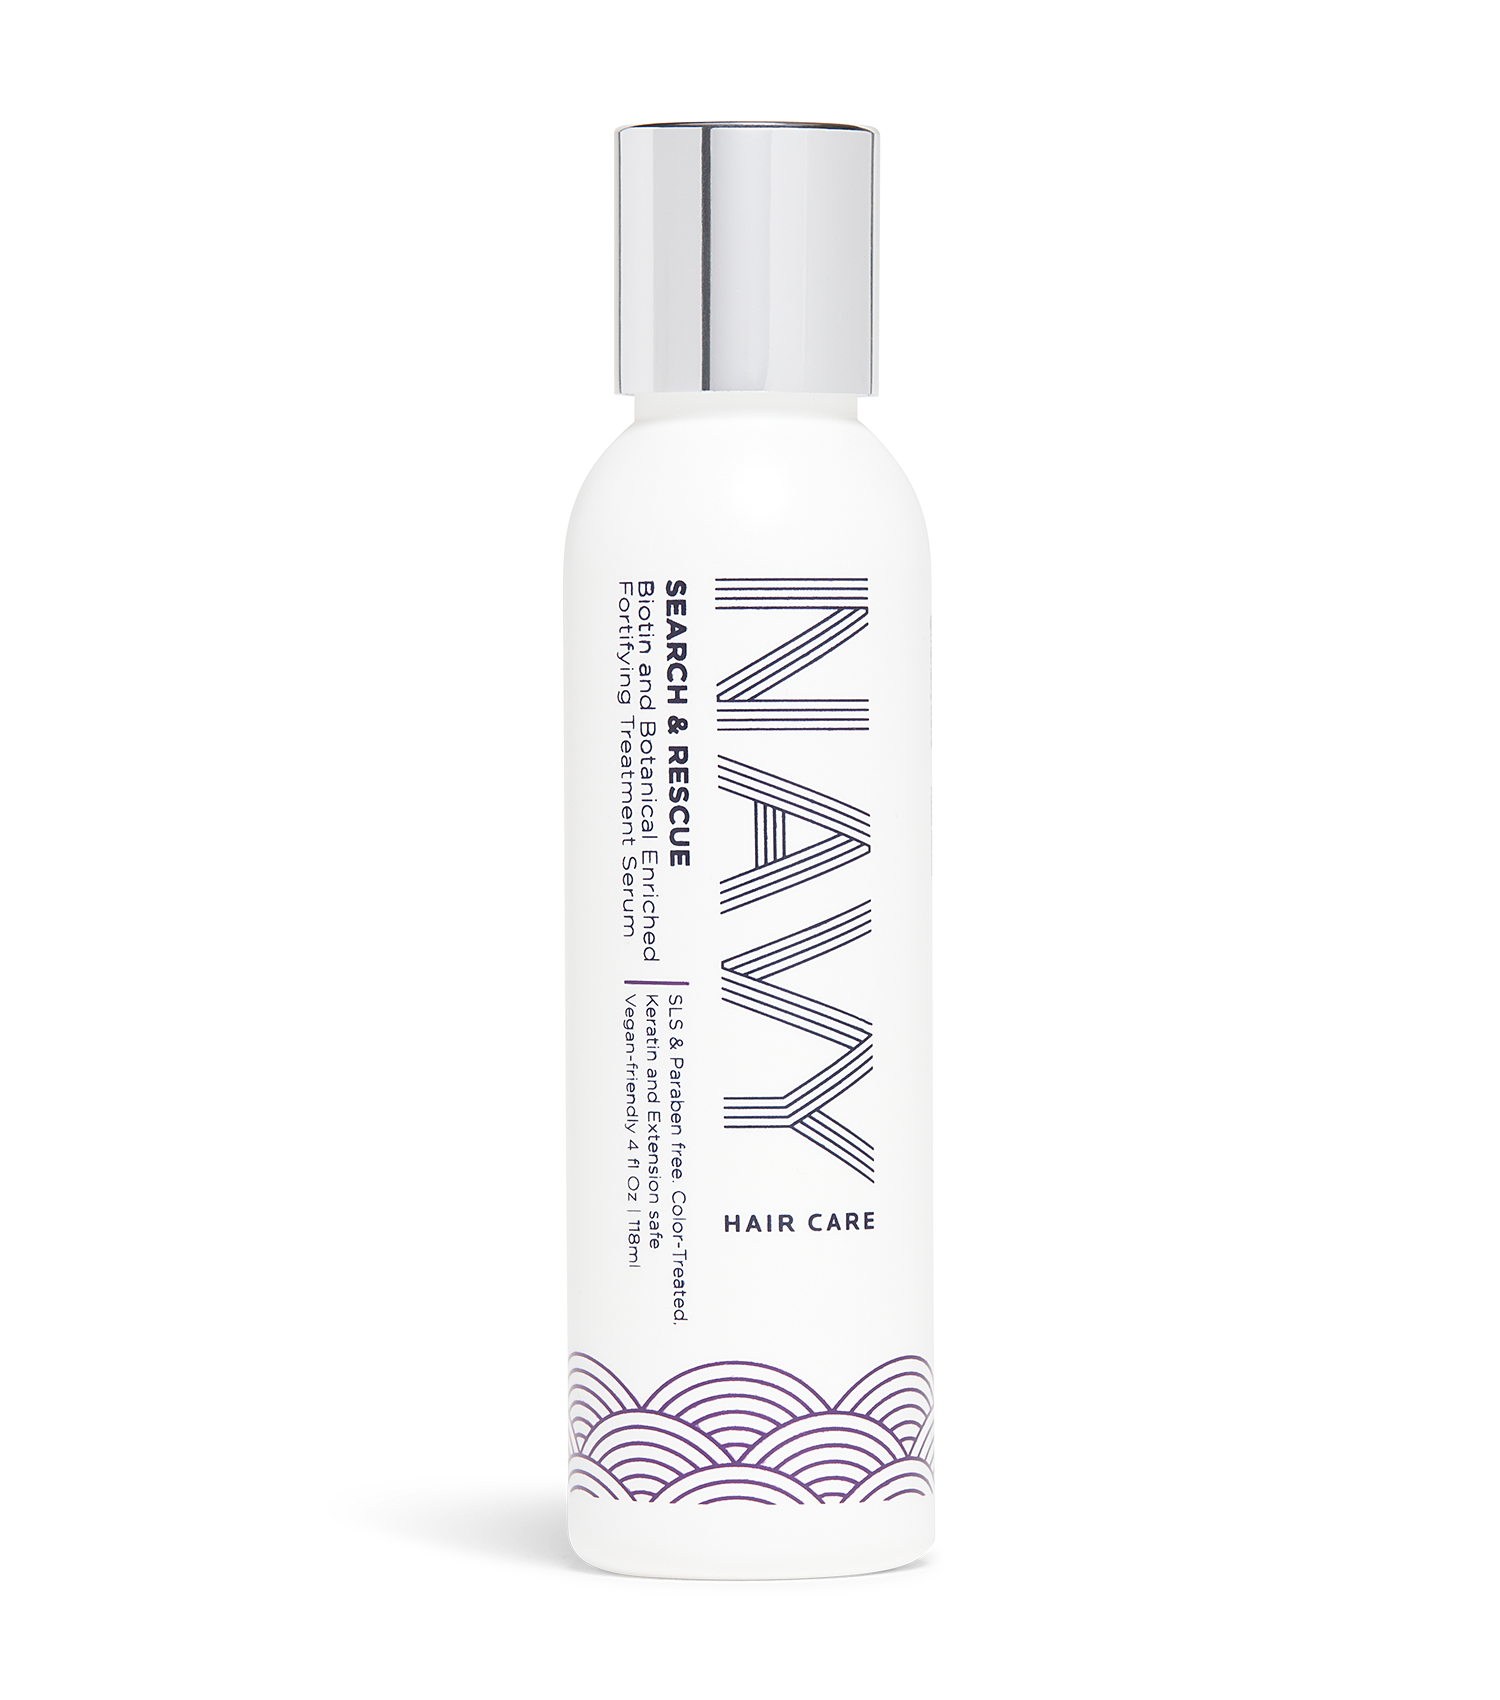 Navy Haircare Search & Rescue - Biotin and Botanical Enriched Fortifying Treatment Serum Navy Haircare Search & Rescue - Biotin and Botanical Enriched Fortifying Treatment Serum 1